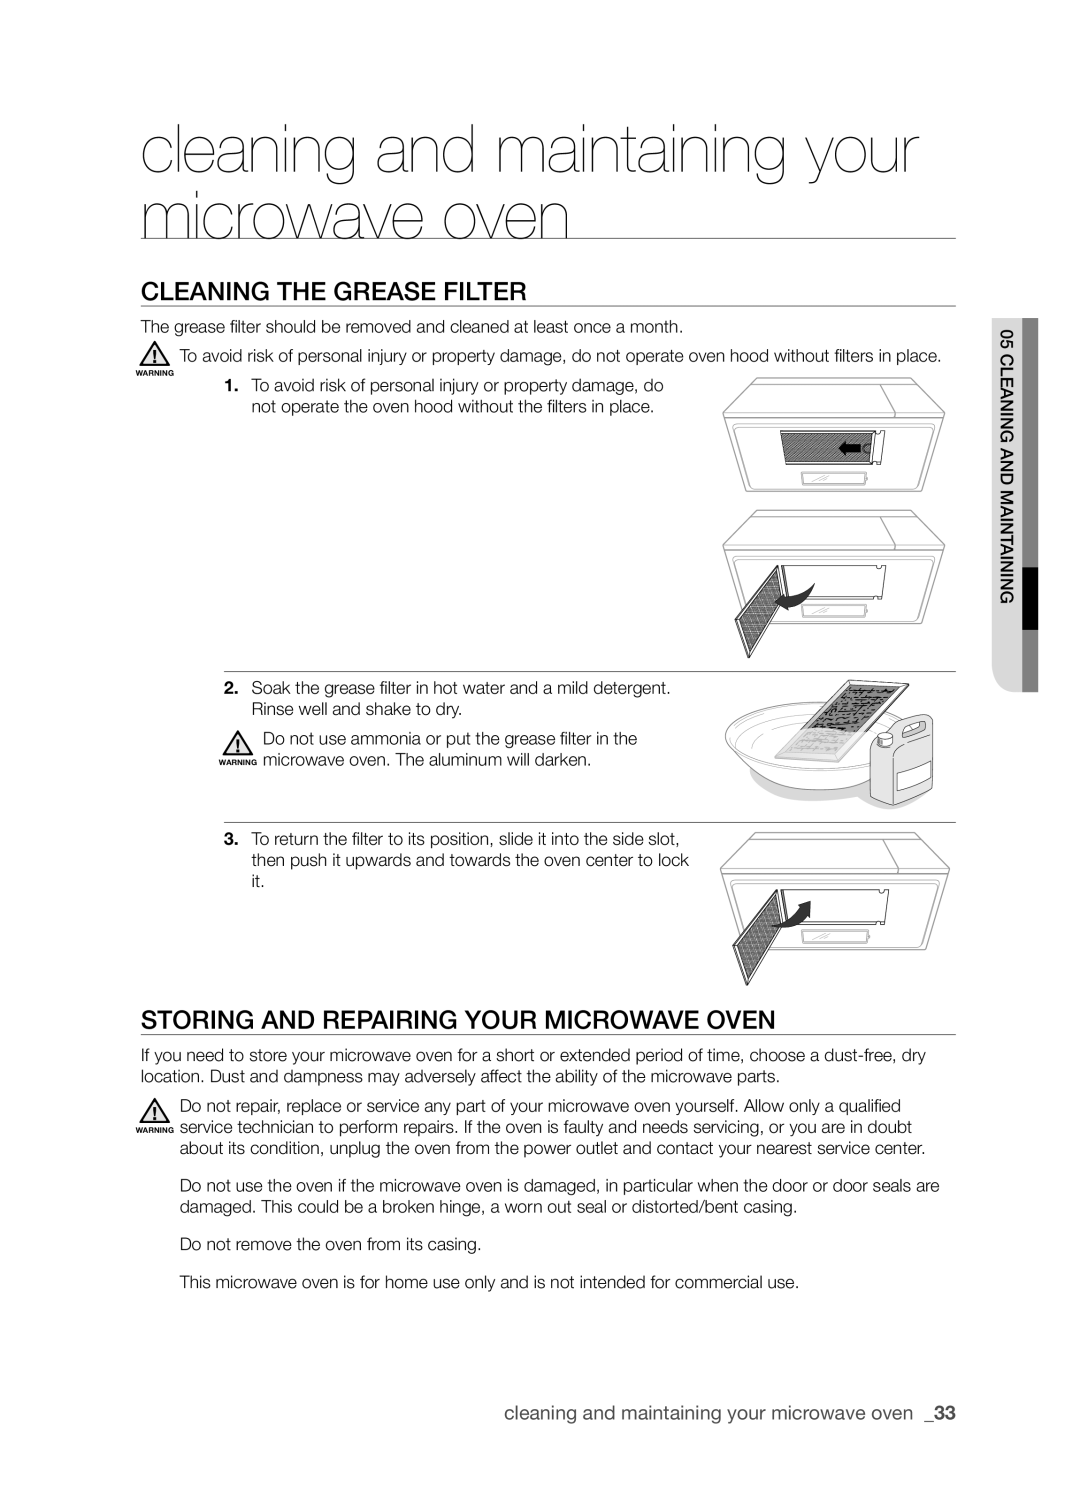 Samsung SMH9151 user manual Cleaning the grease filter, Storing and repairing your microwave oven 